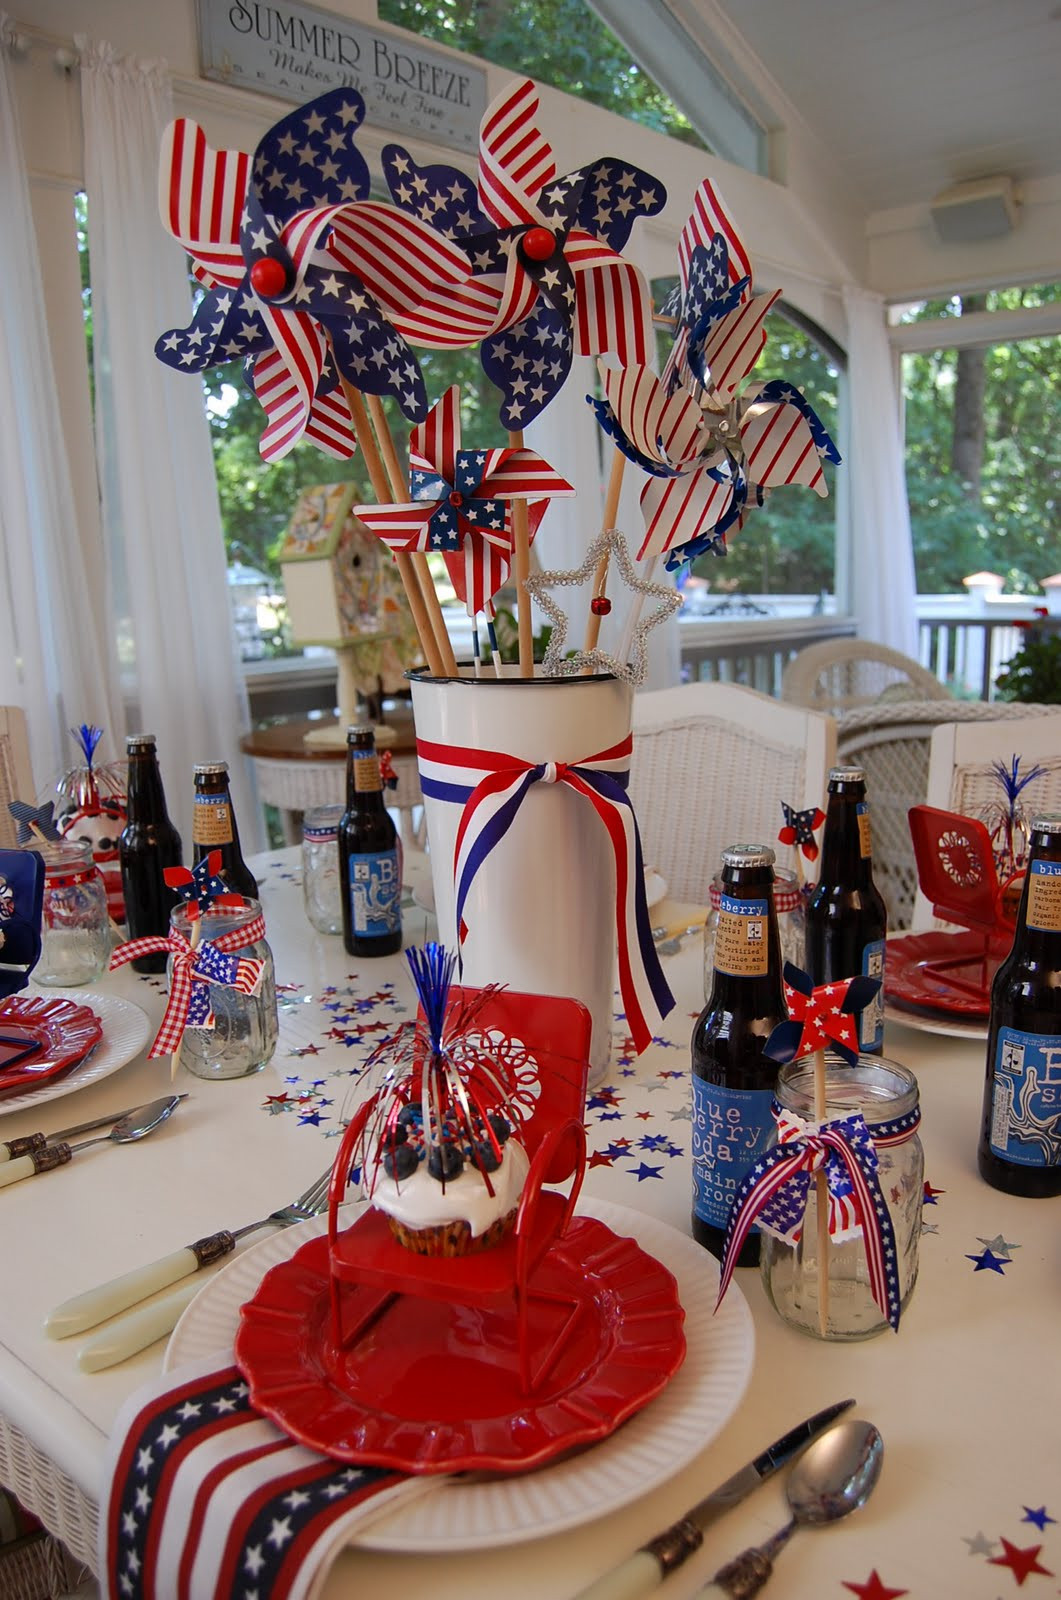 4th Of July Decoration Ideas
 A Patriotic Celebration Table Setting